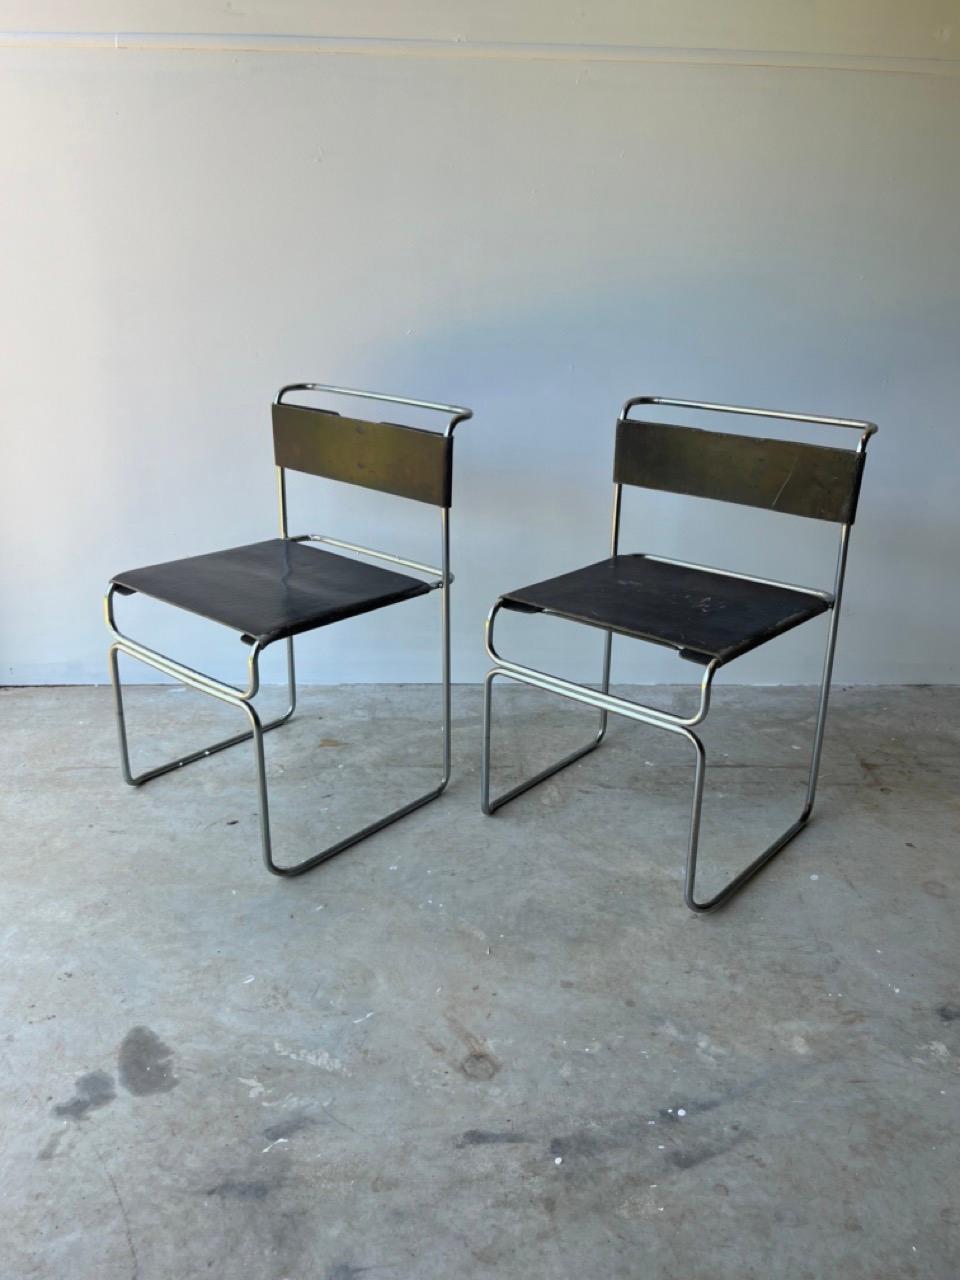 This chairs are stackable with structure in chrome and black fabric, backrest is stretched and held by springs. Unique slim minimalistic design. 

Giovanni Carini was an Italian architect and designer known for his contemporary and innovative